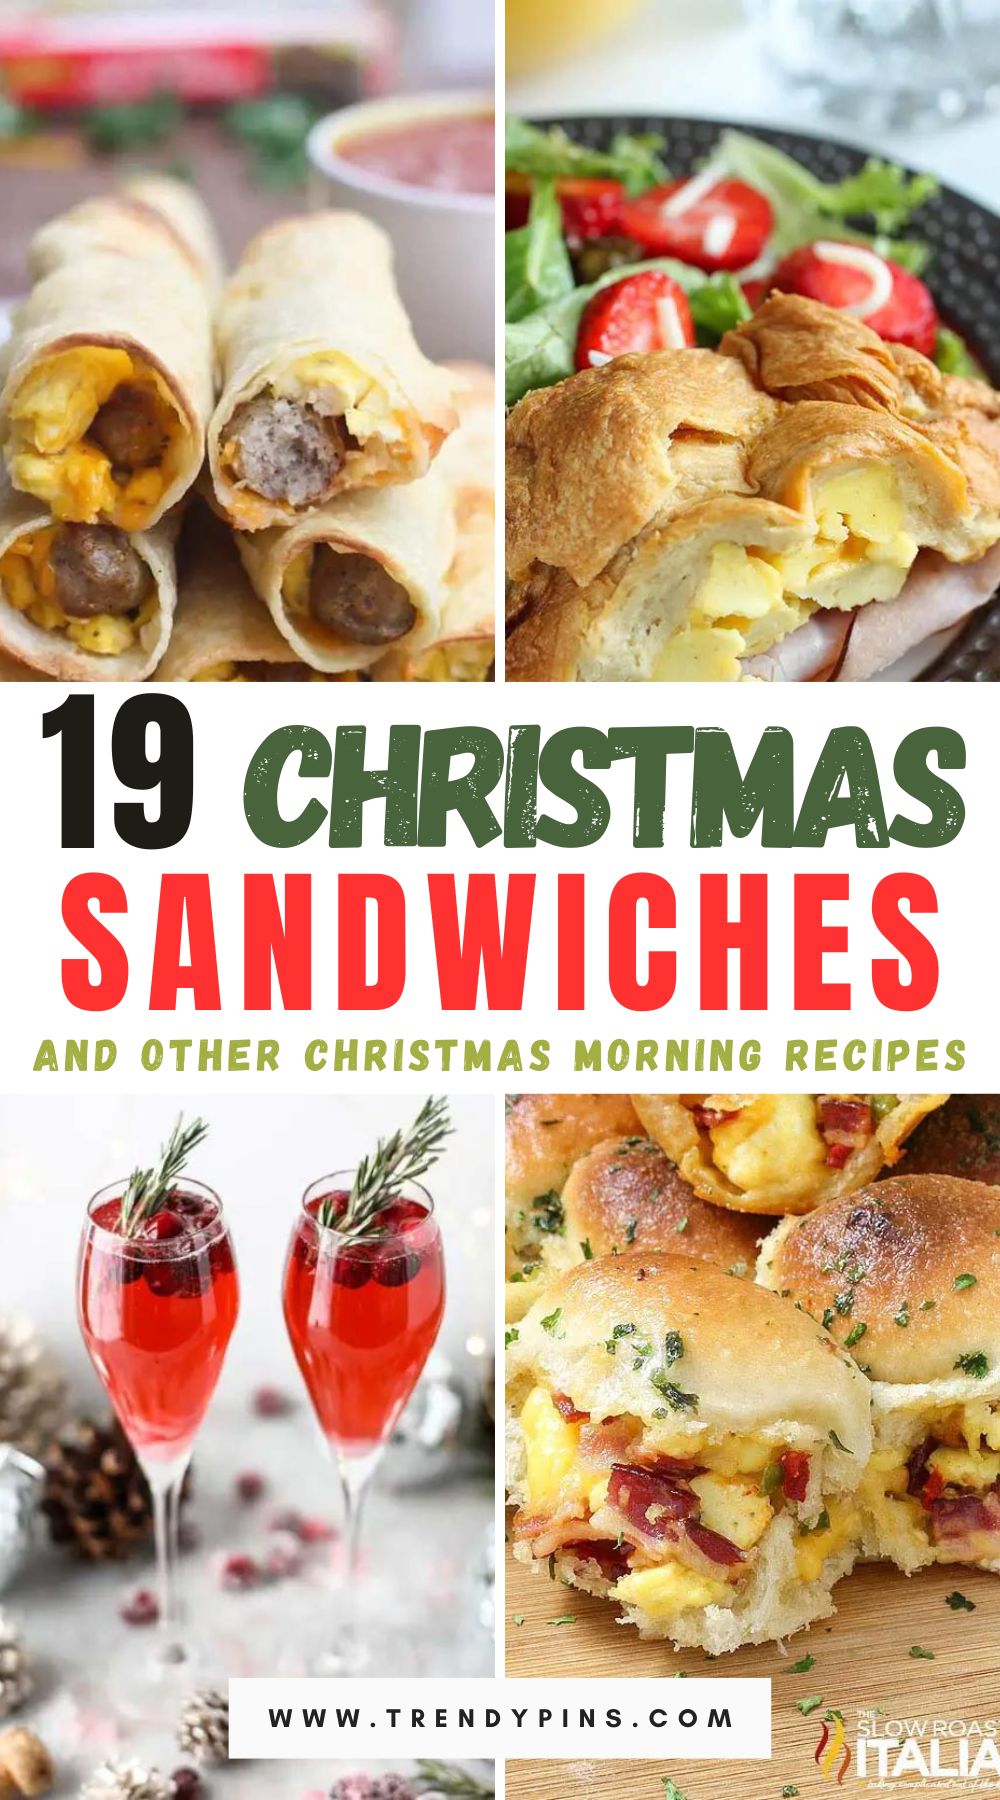 Elevate your Christmas morning with a delightful spread of 19 festive breakfast sandwiches and other mouthwatering recipes that promise to kickstart the holiday joy. Click to explore a world of flavorful delights, making your morning as memorable as the season itself!